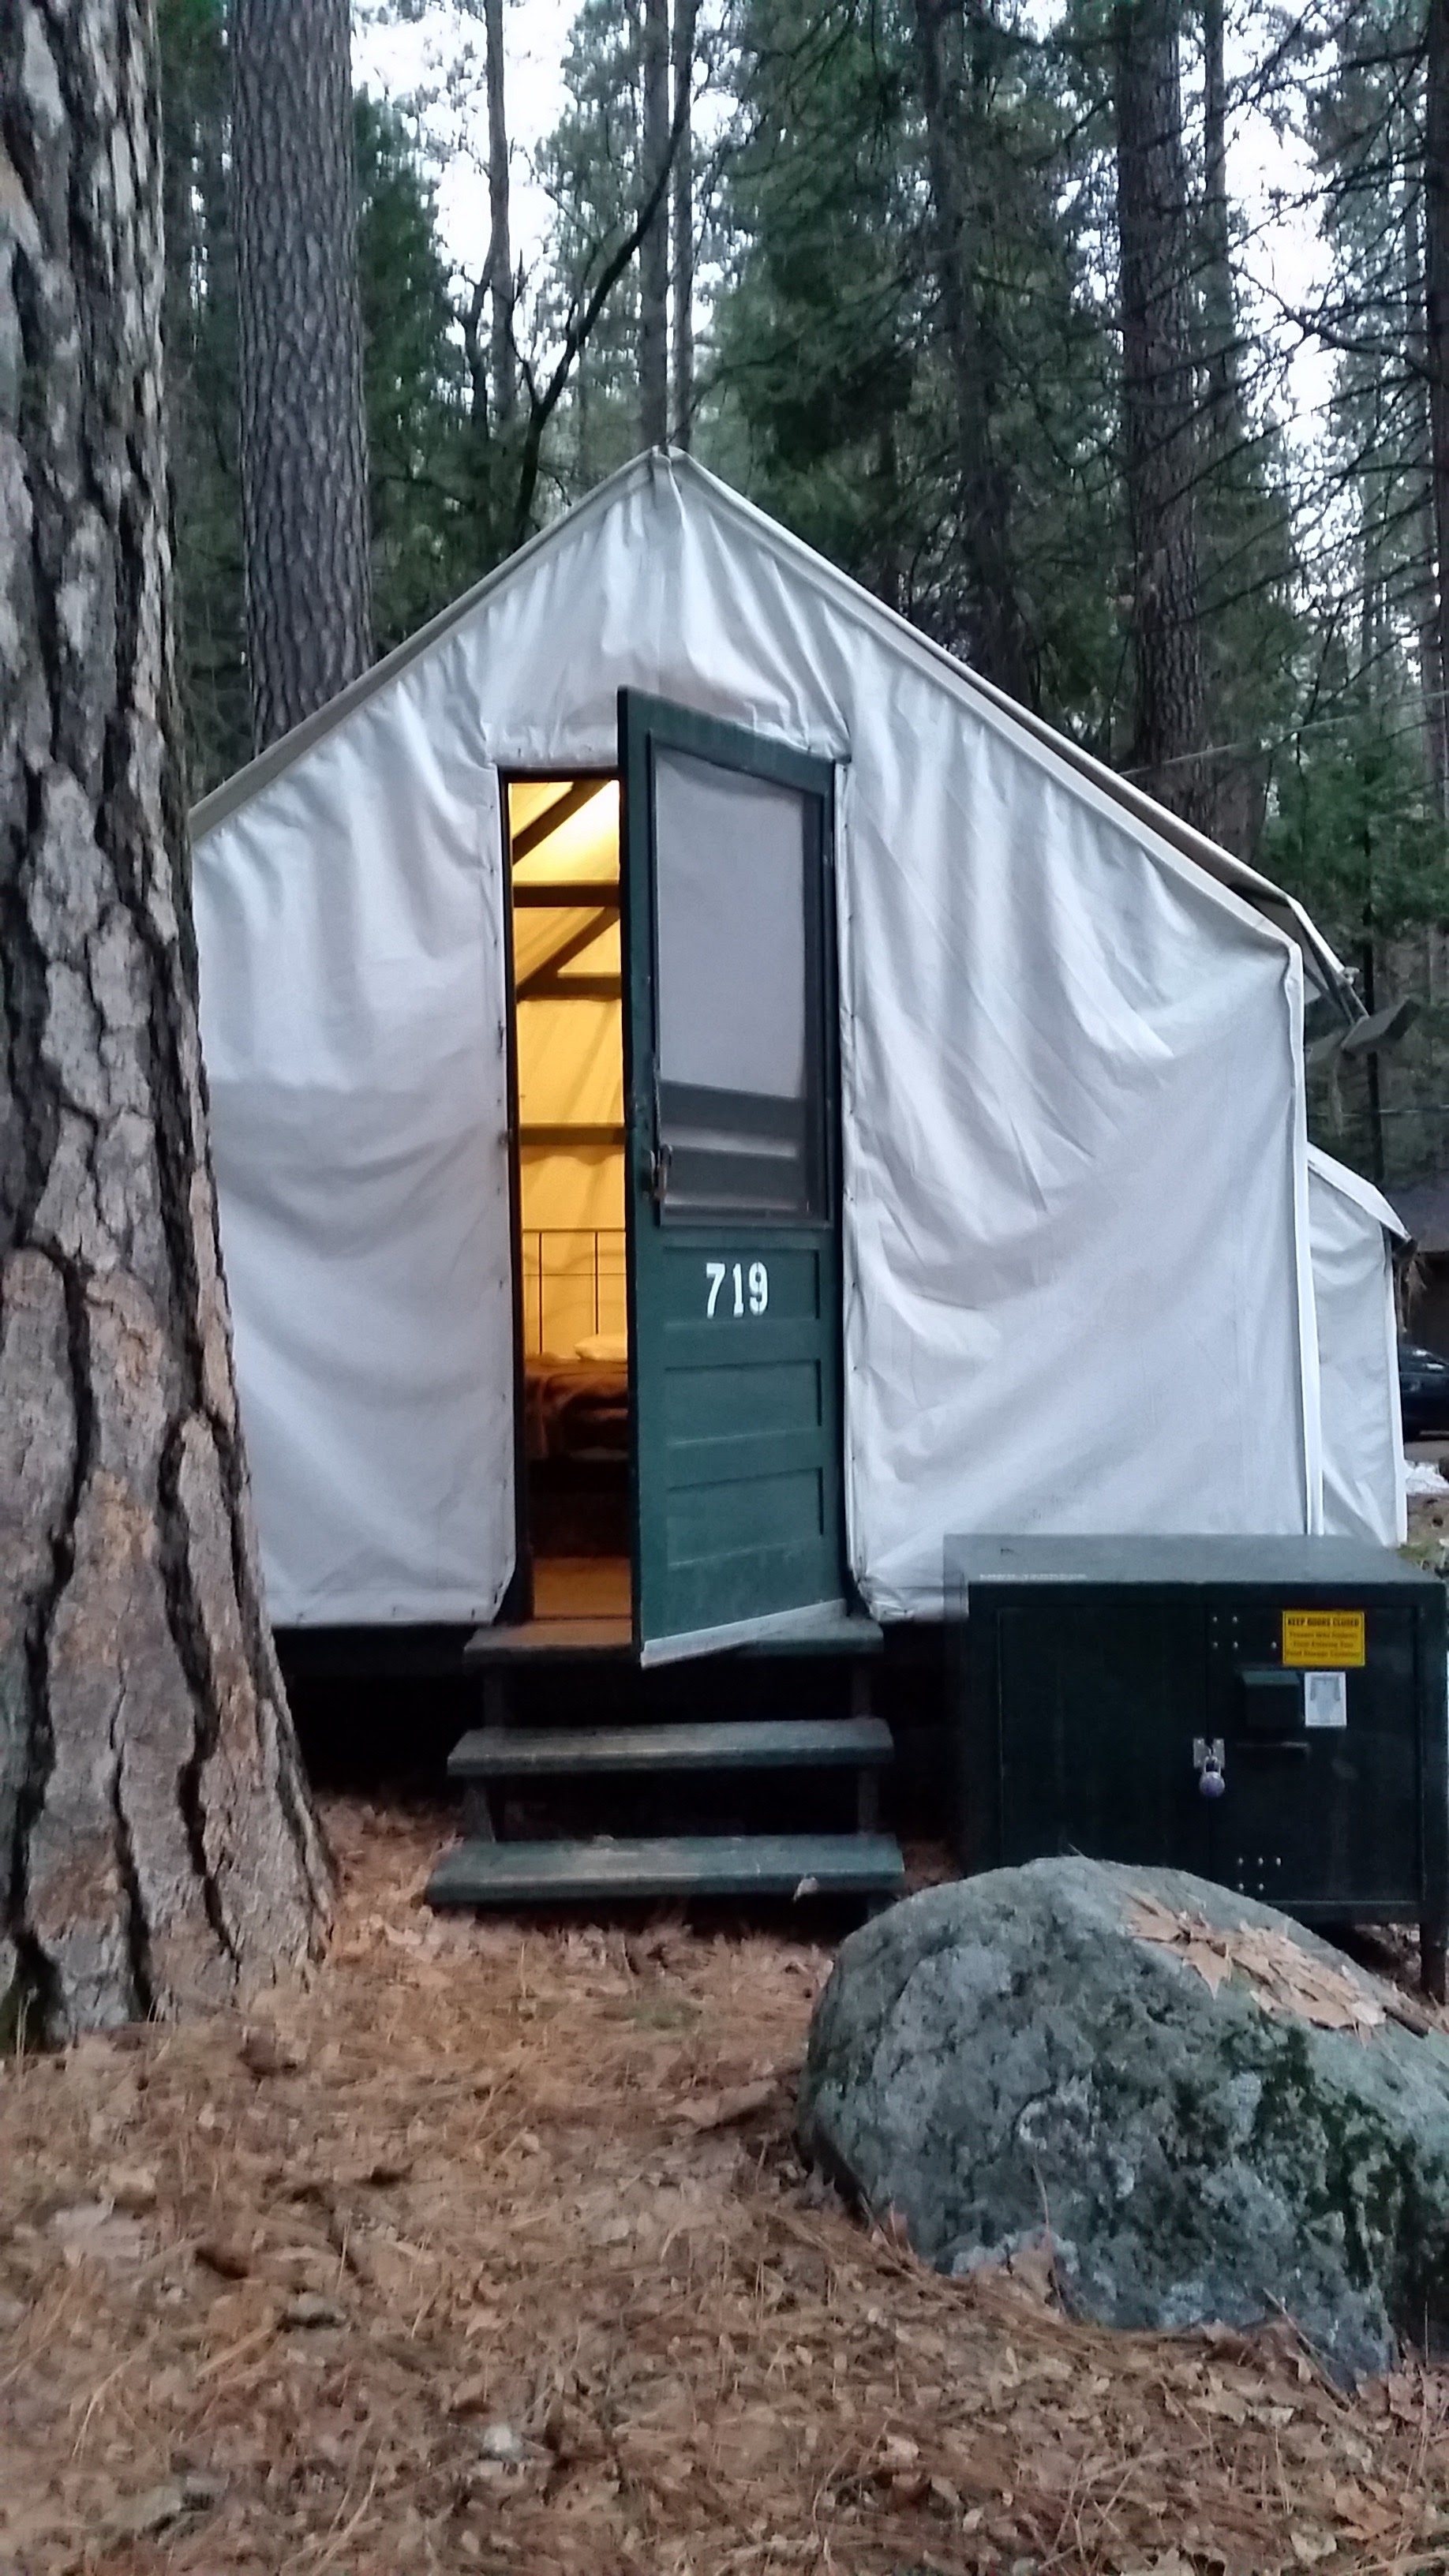 A canvas tent available to reserve at Half Dome Village in Yosemite National Park in California